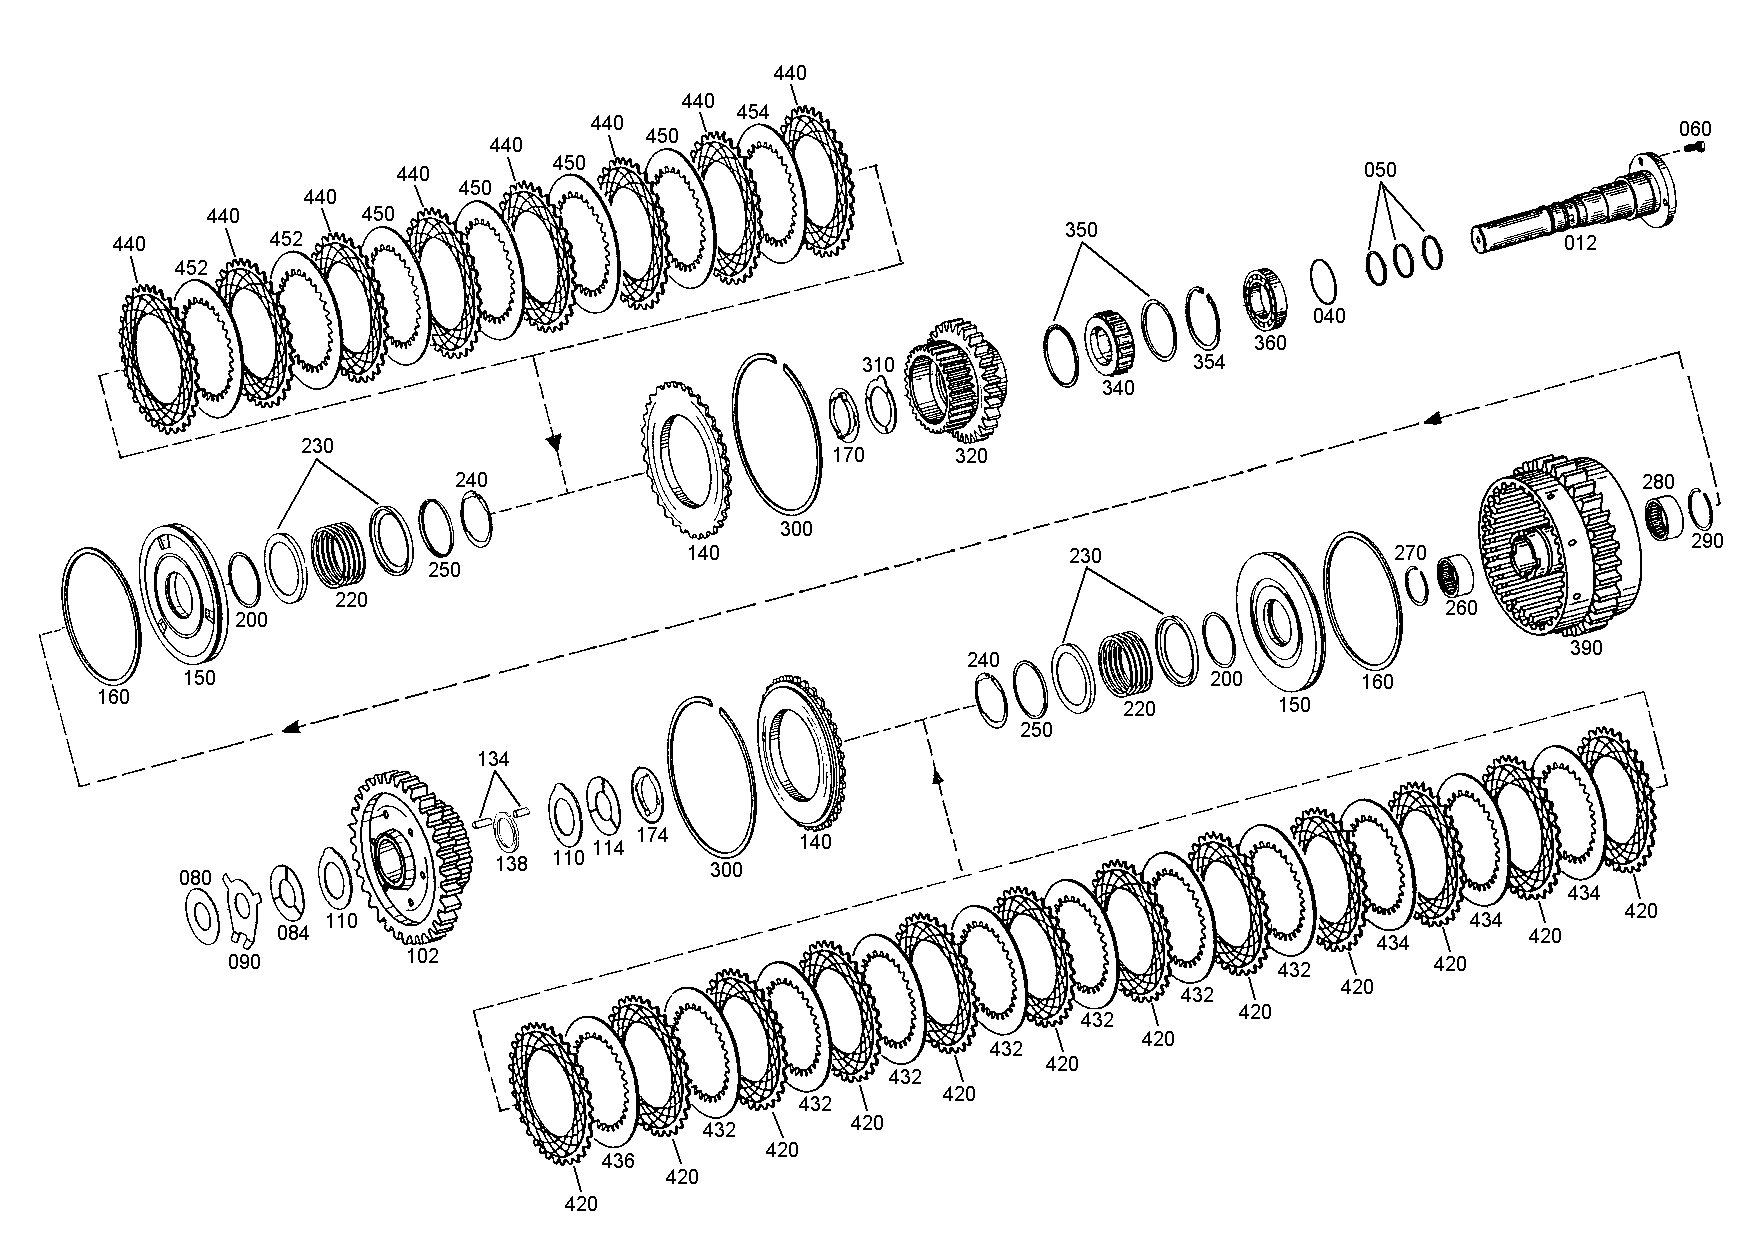 drawing for NACCO-IRV 1390849 - ROLLER CAGE (figure 3)